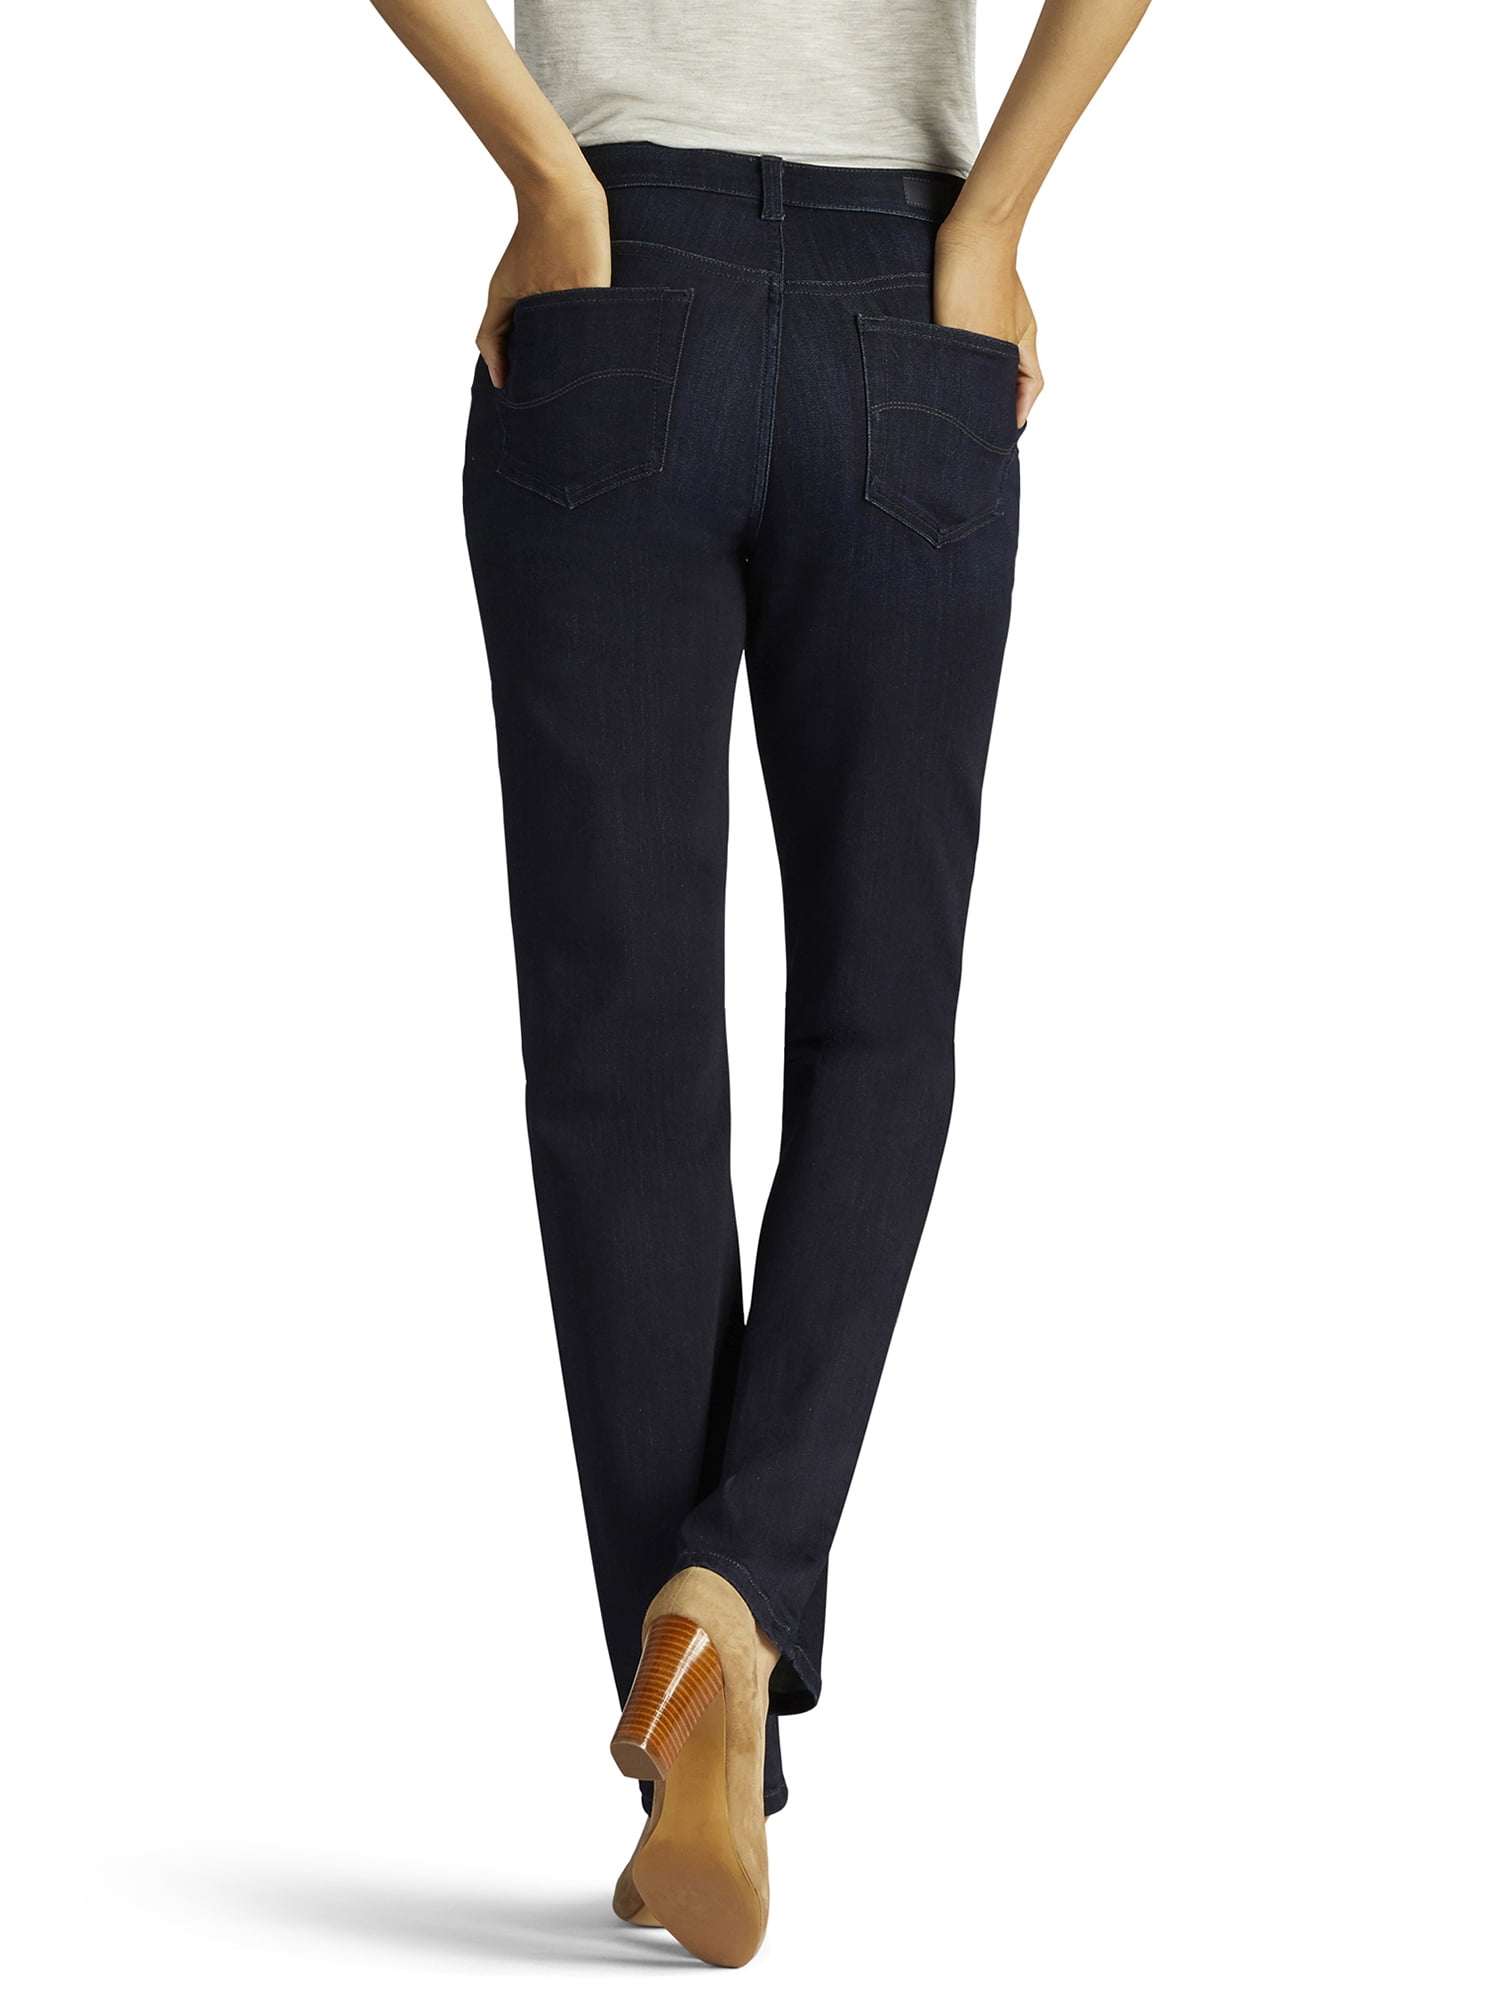 Lee Women's Relaxed Fit Straight Leg Jeans 